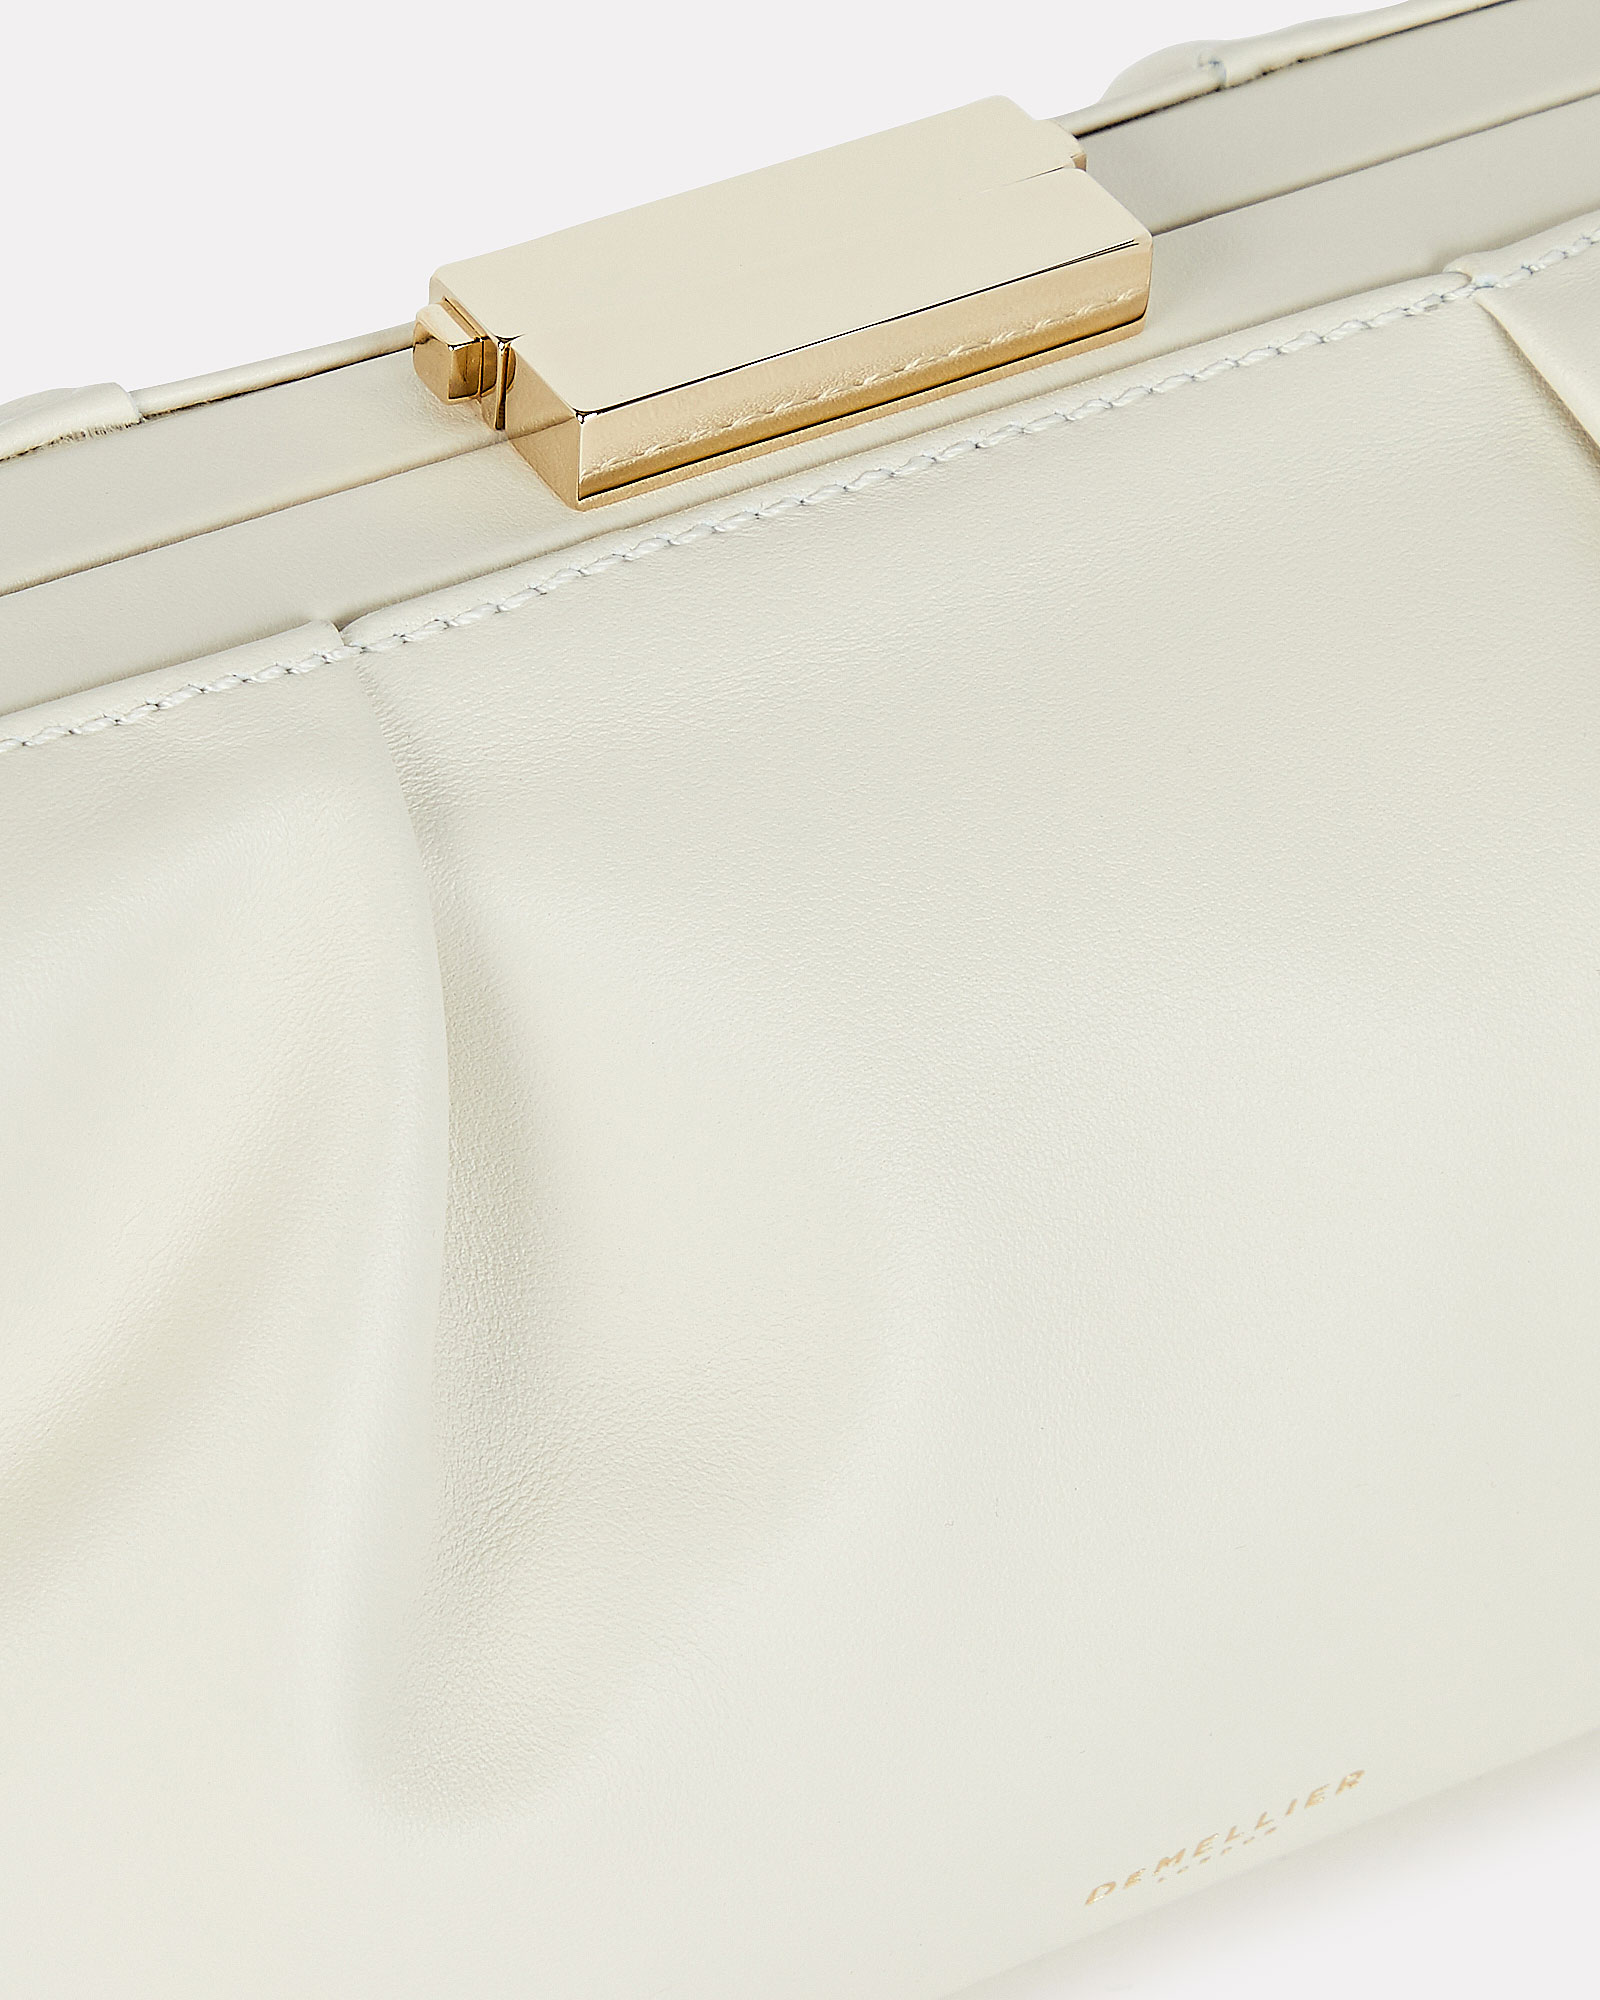 DeMellier Mini Florence Soft Leather Pouch | INTERMIX®